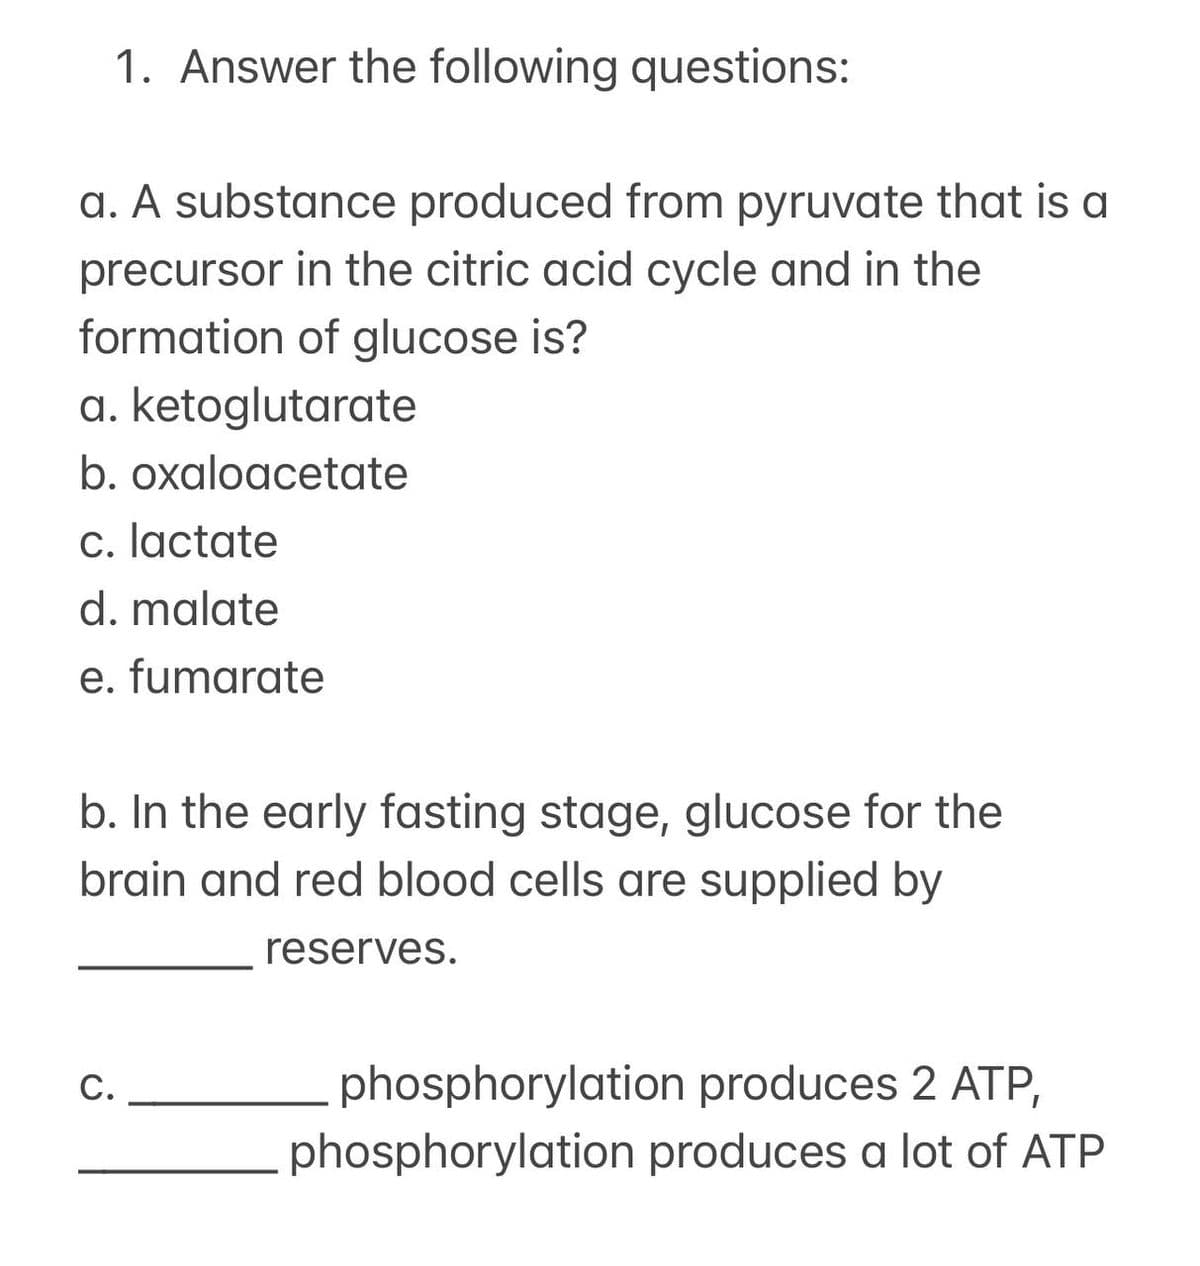 1. Answer the following questions:
a. A substance produced from pyruvate that is a
precursor in the citric acid cycle and in the
formation of glucose is?
a. ketoglutarate
b. oxaloacetate
c. lactate
d. malate
e. fumarate
b. In the early fasting stage, glucose for the
brain and red blood cells are supplied by
reserves.
C.
phosphorylation produces 2 ATP,
phosphorylation produces a lot of ATP